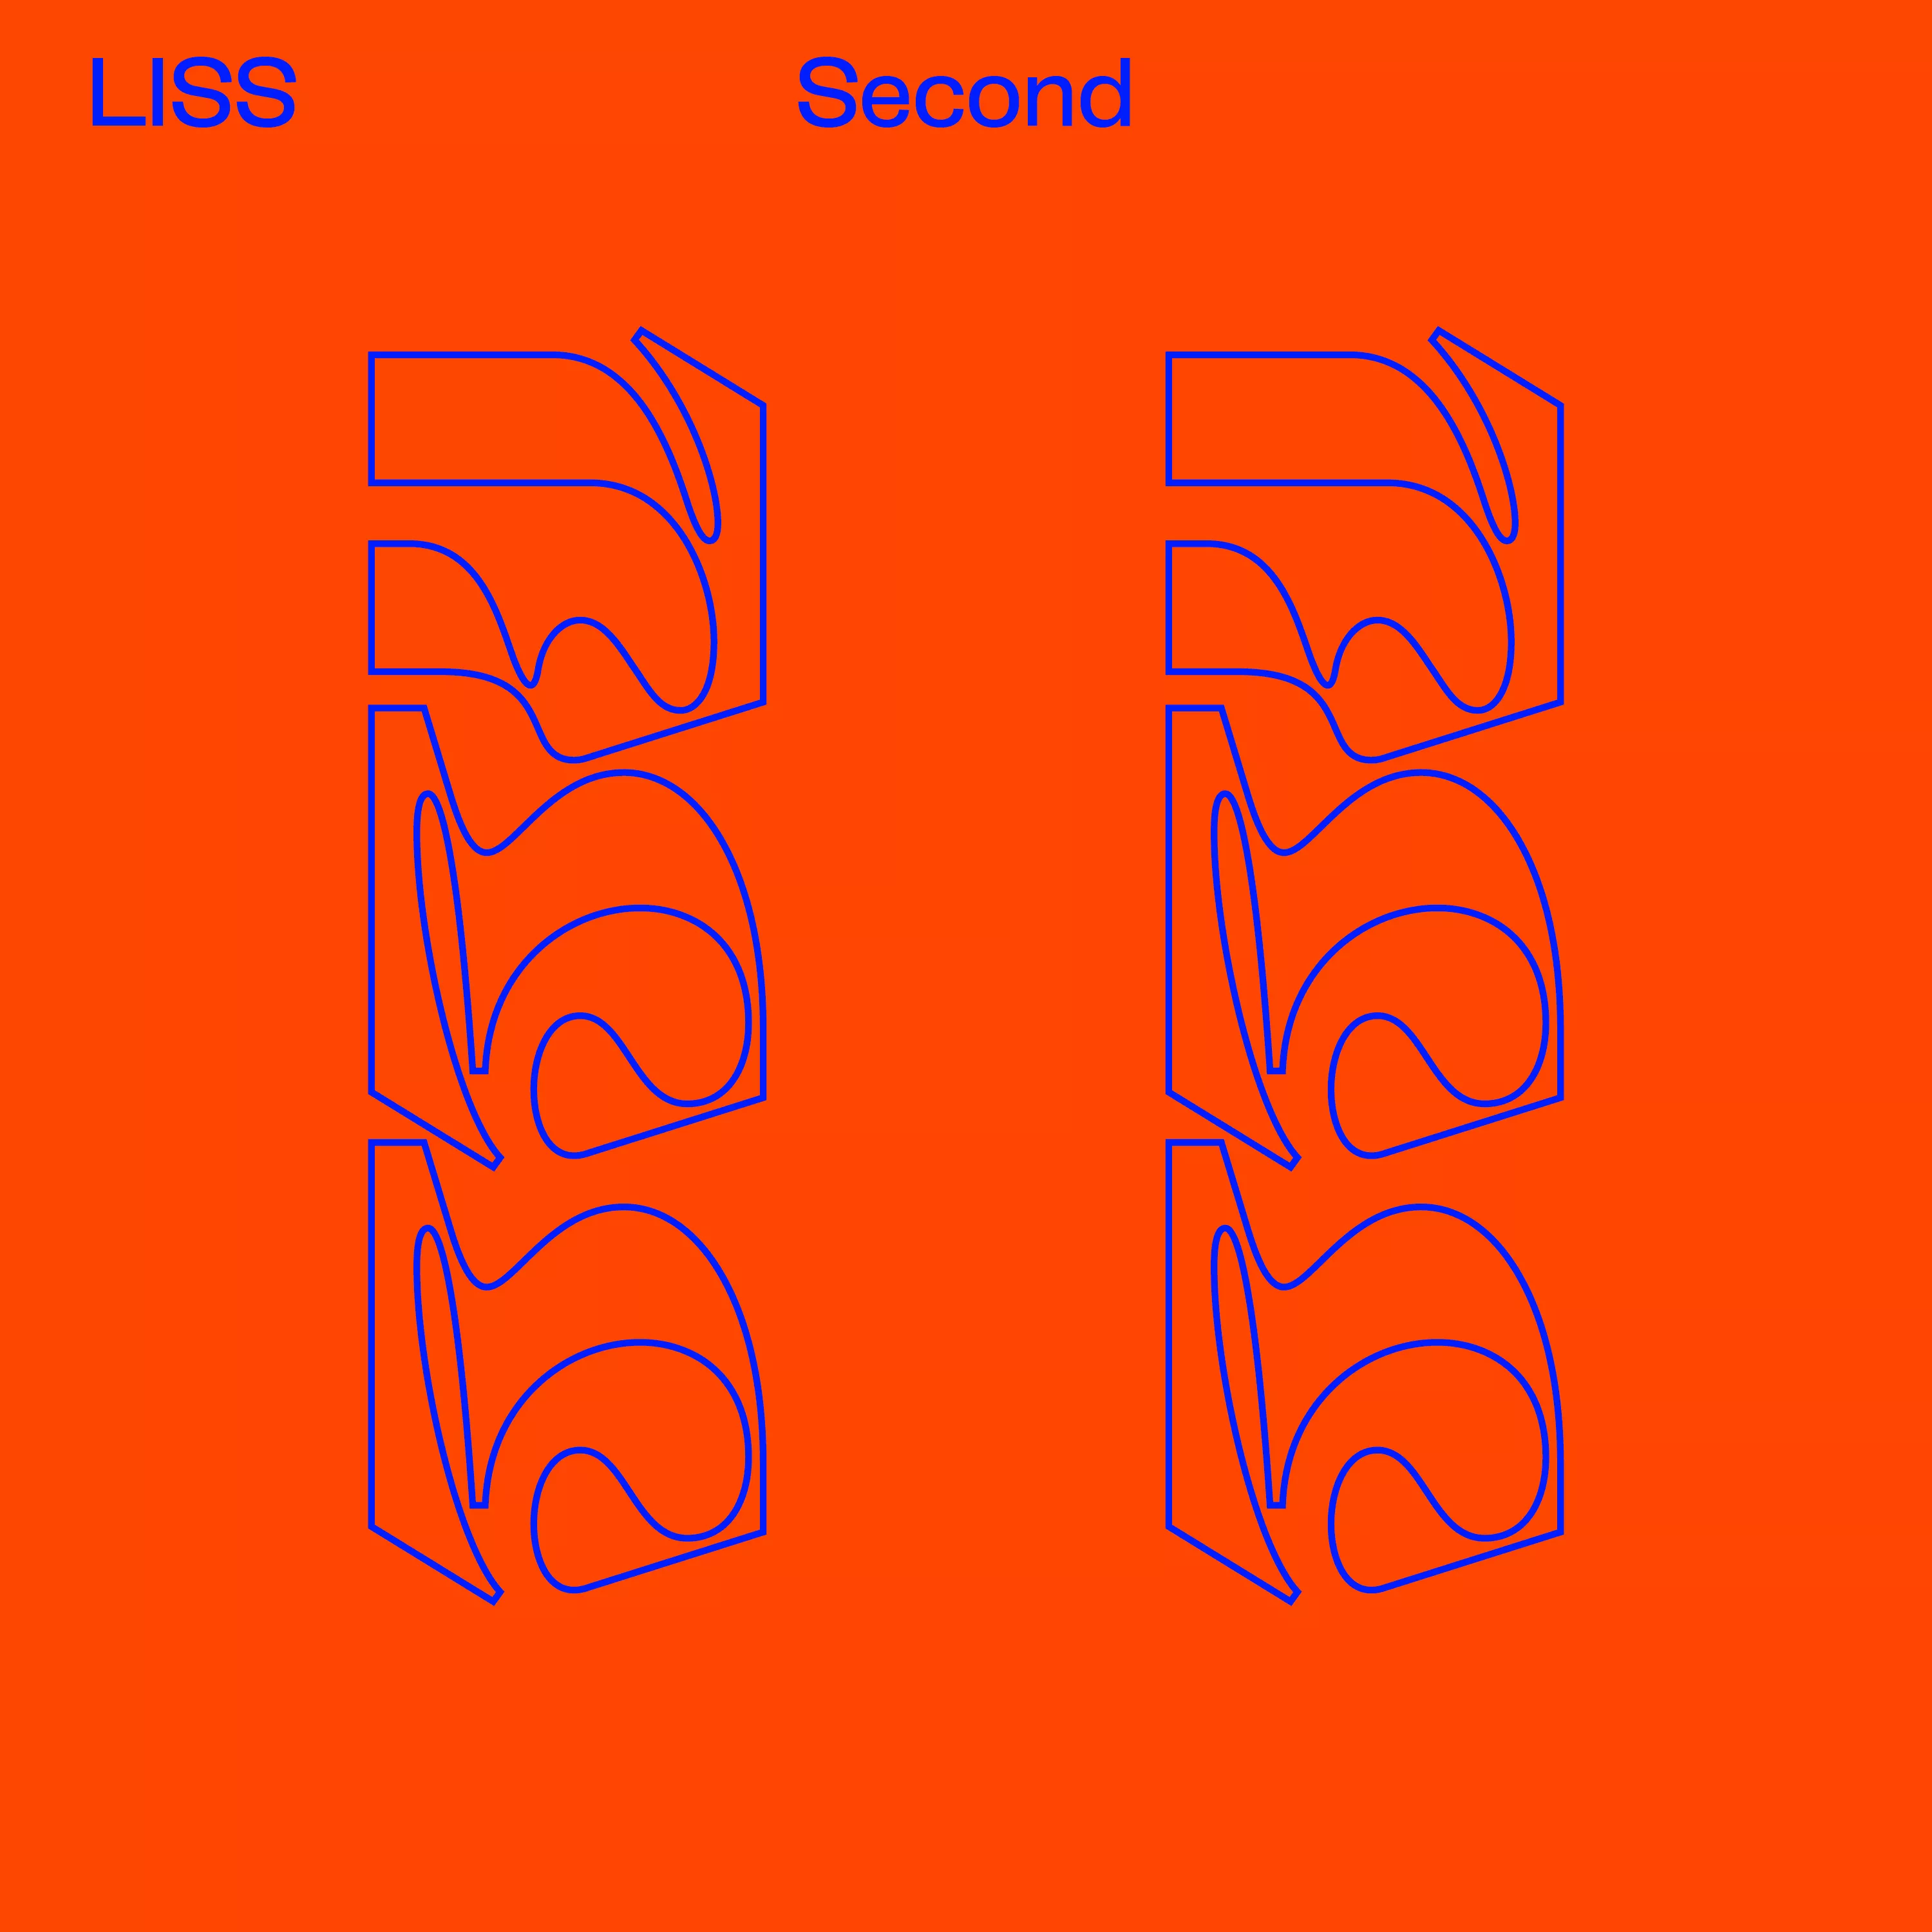 Second - Liss